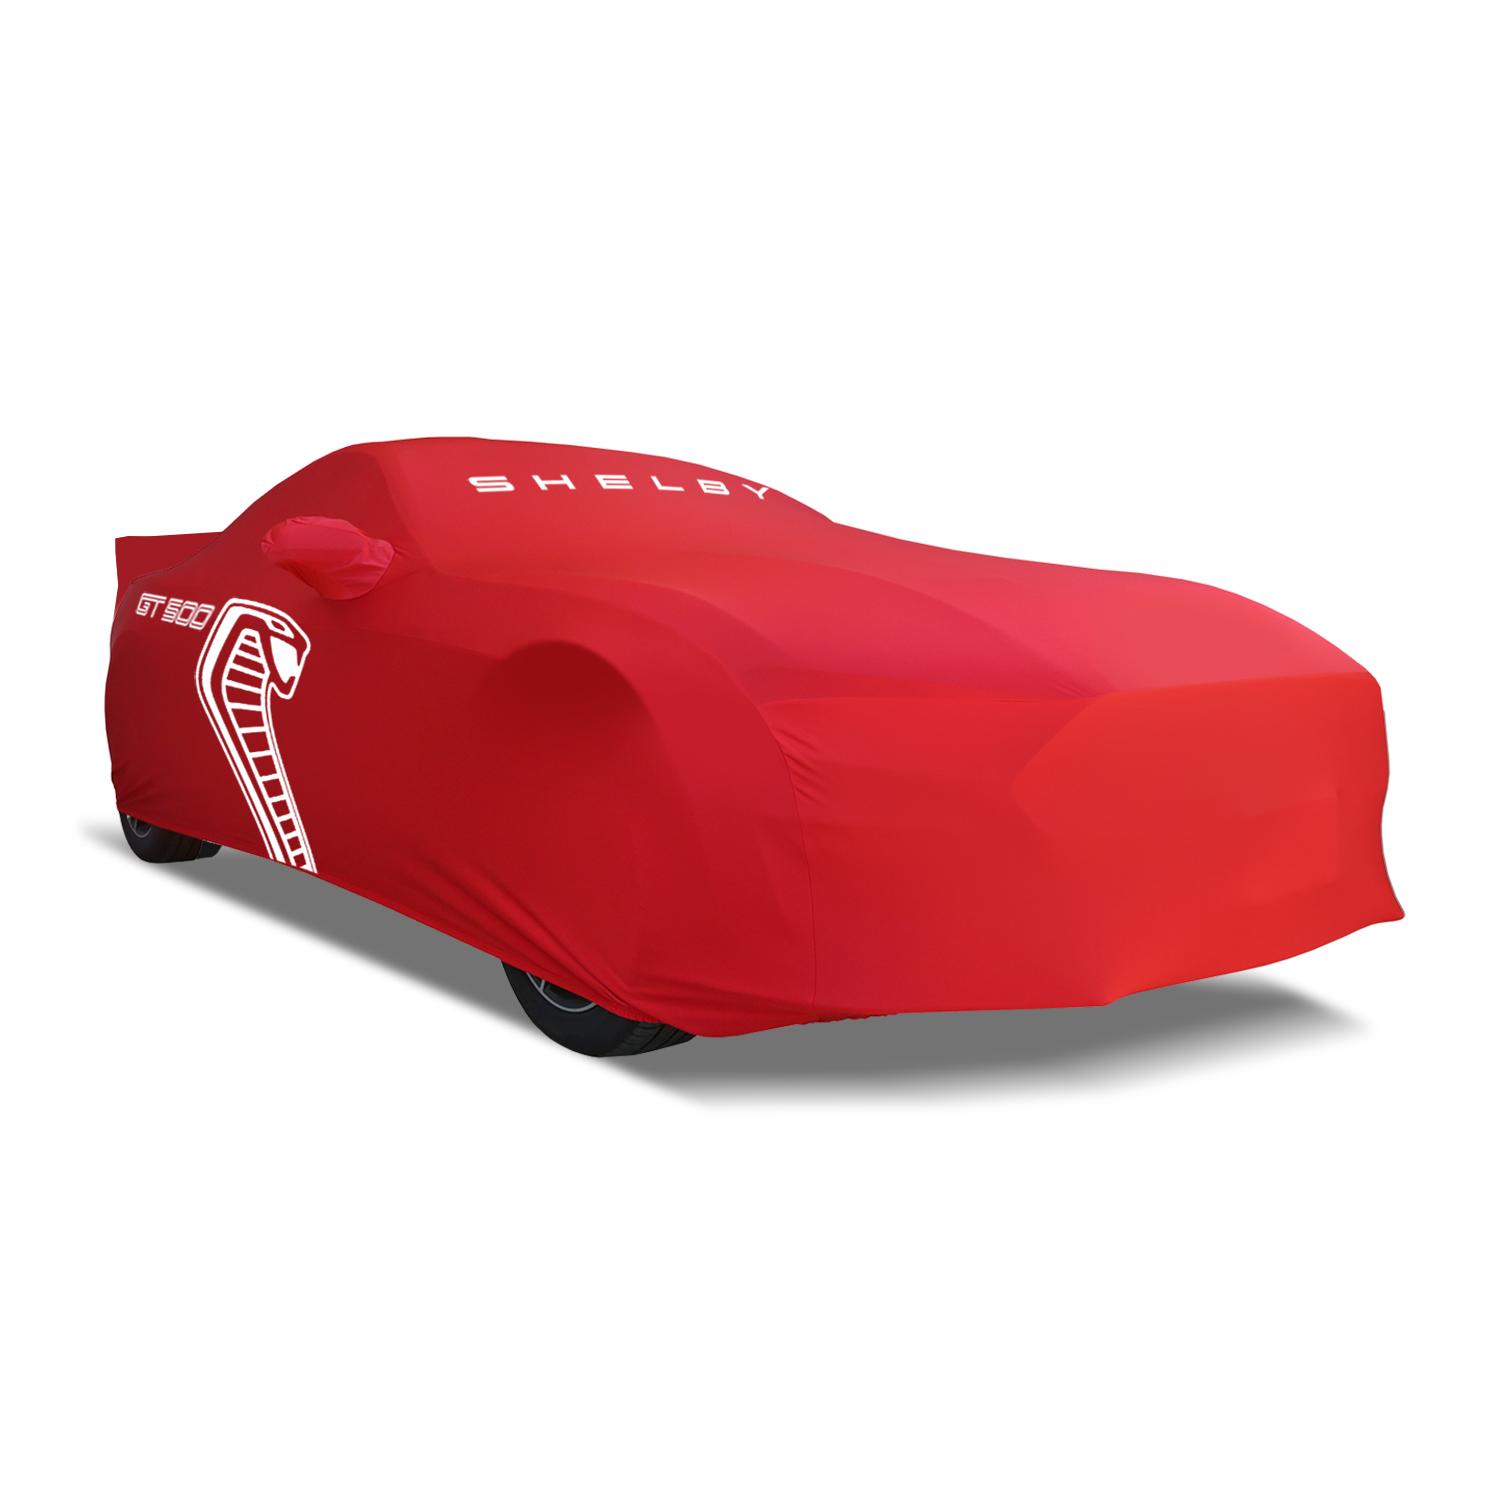 Image for Full Vehicle Cover - Indoor, Large Wing, Red from AccessoriesCanada